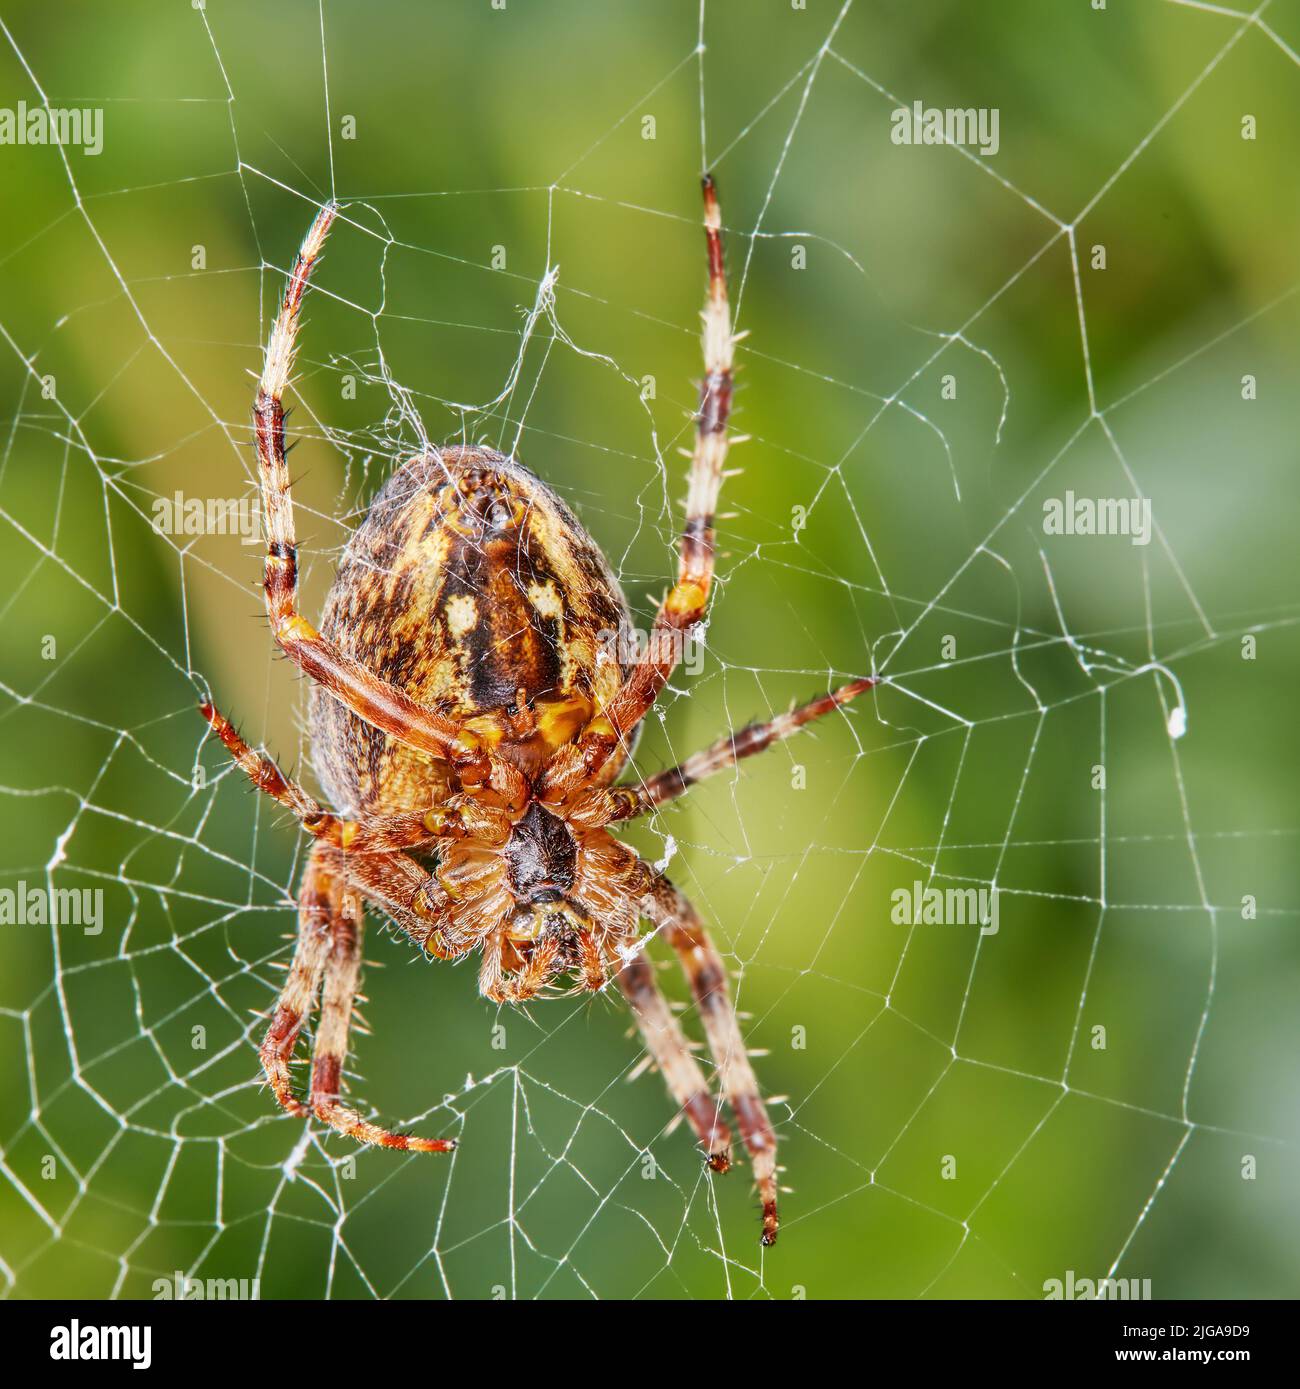 Closeup of a Walnut Orb Weaver spider in a web against blur leafy background in its natural habitat. An eight legged arachnid making a cobweb in Stock Photo